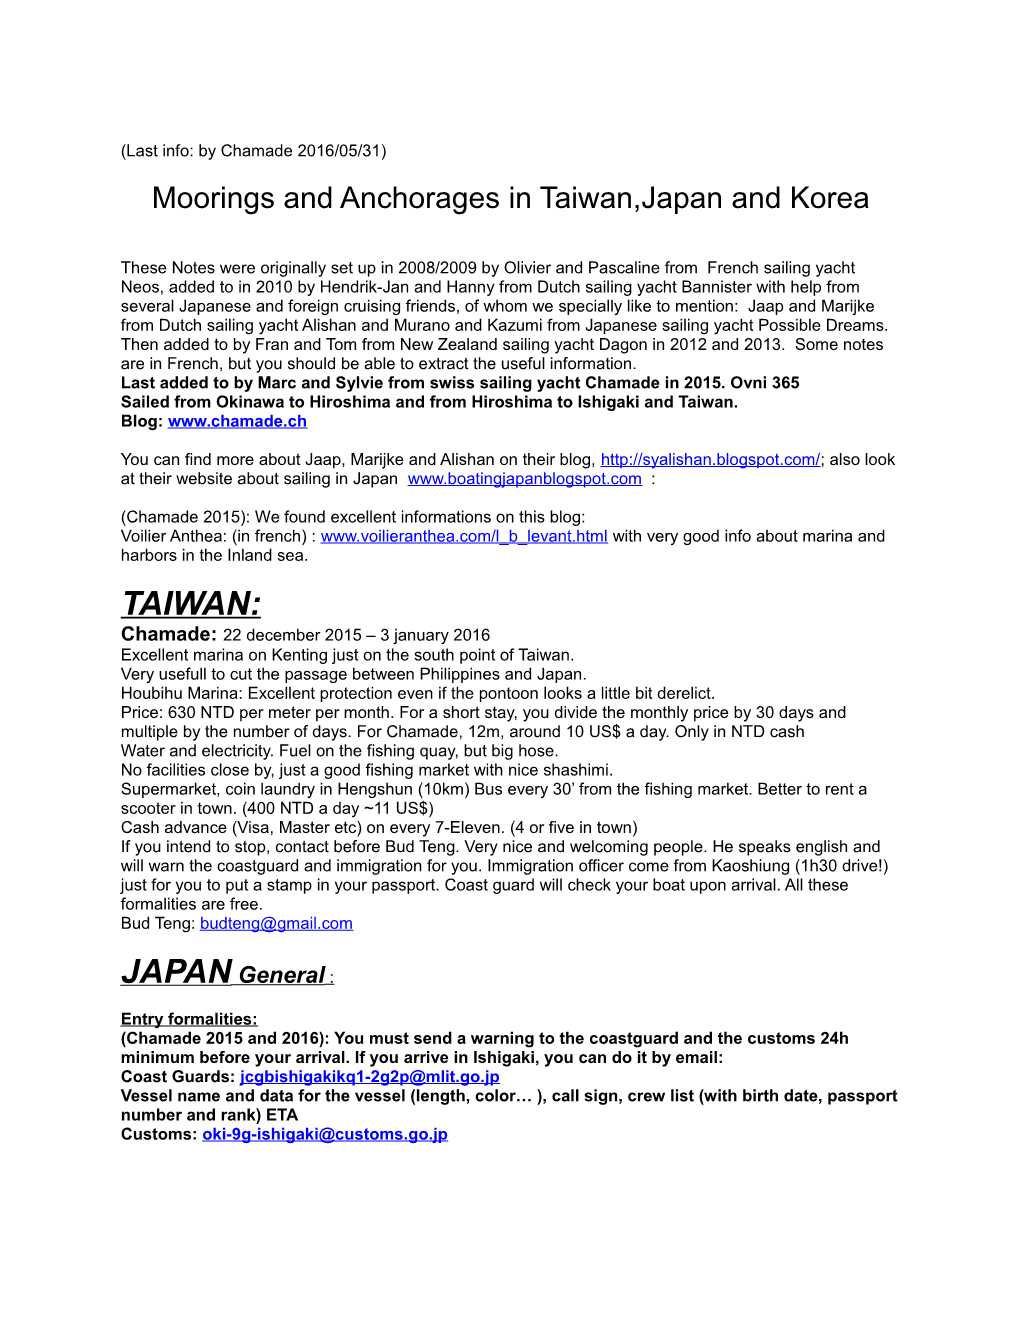 Moorings and Anchorages in Taiwan,Japan and Korea